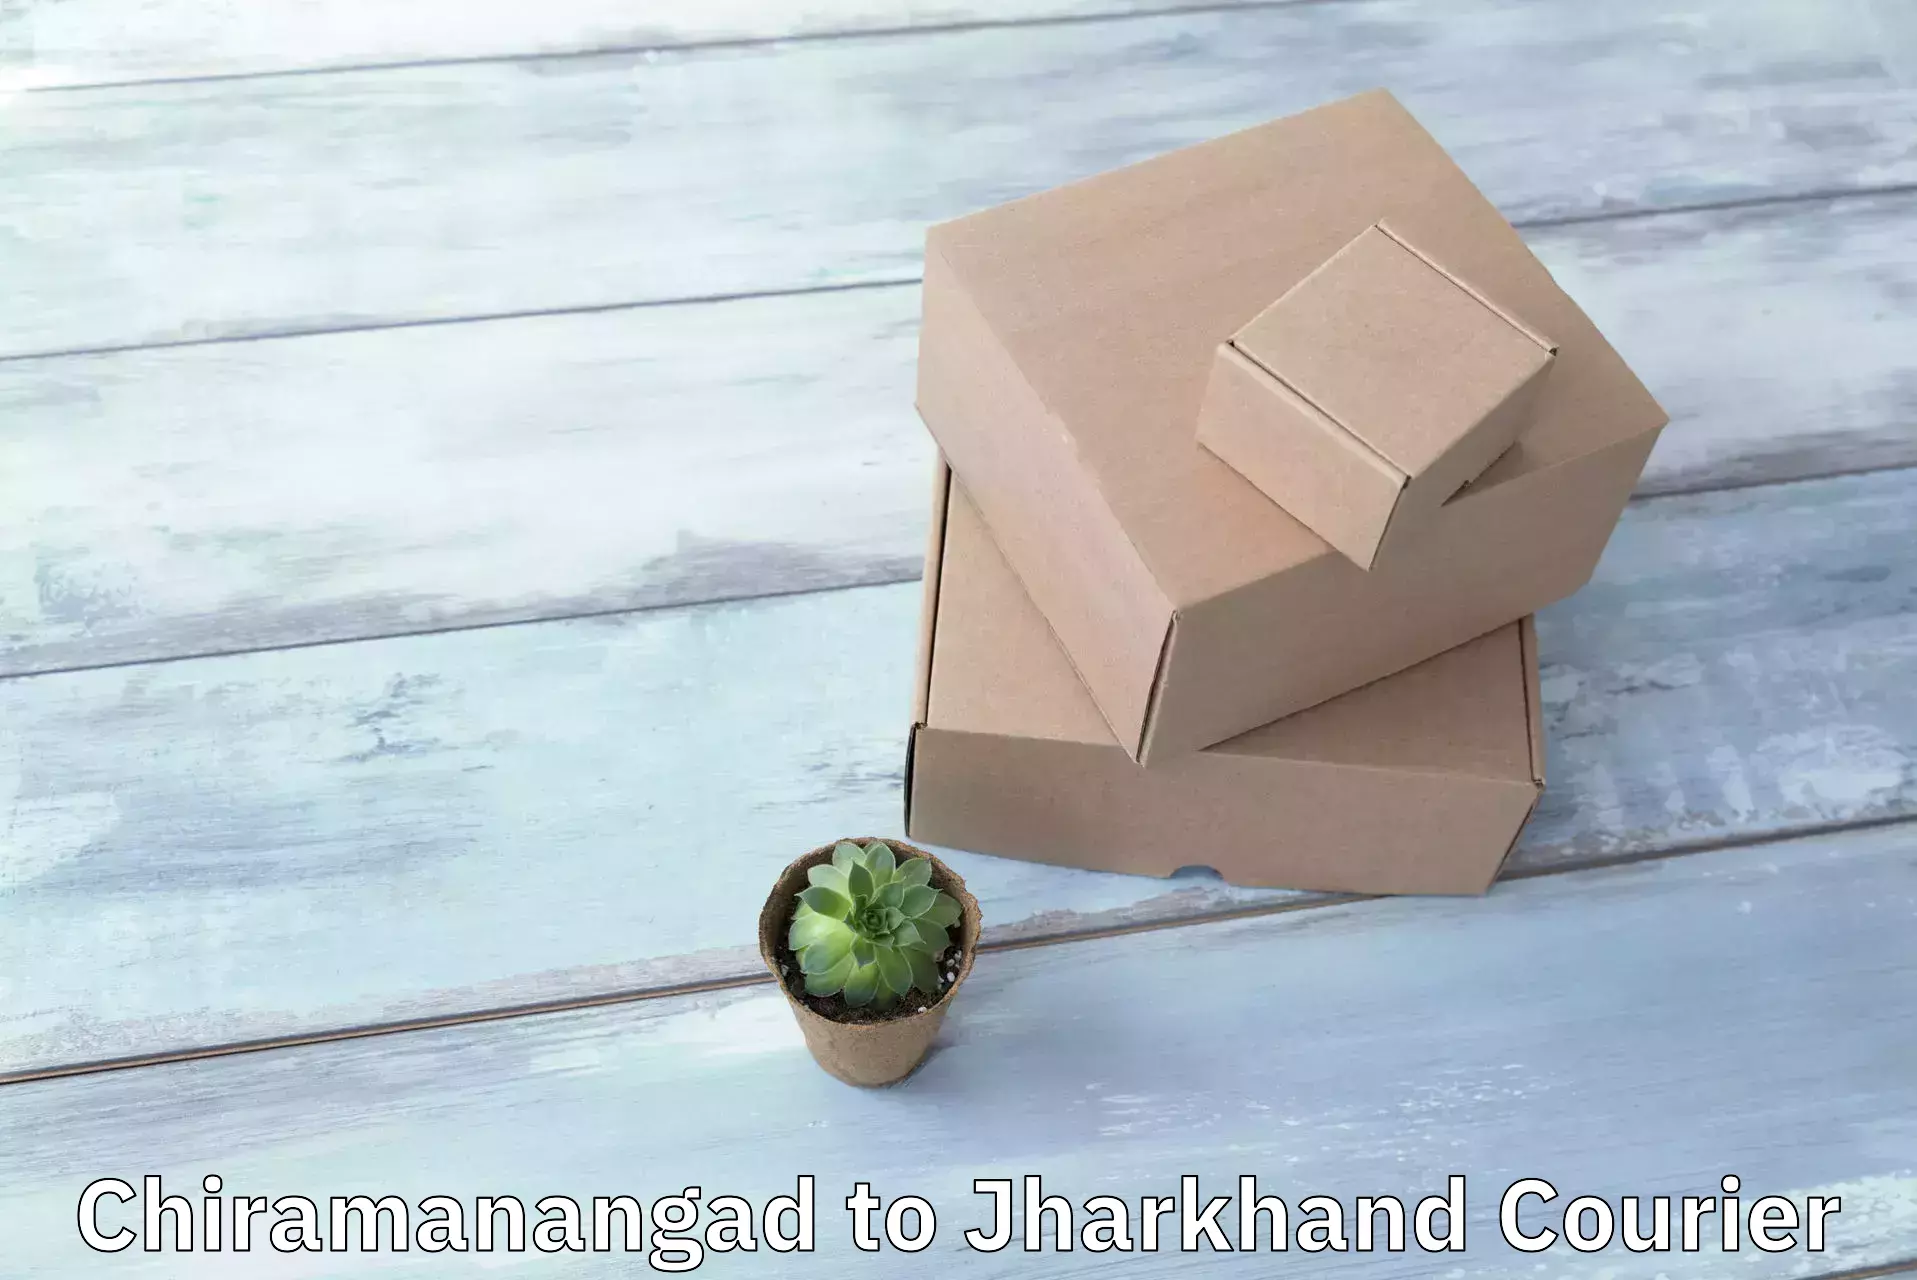 Customizable delivery plans Chiramanangad to Jharkhand